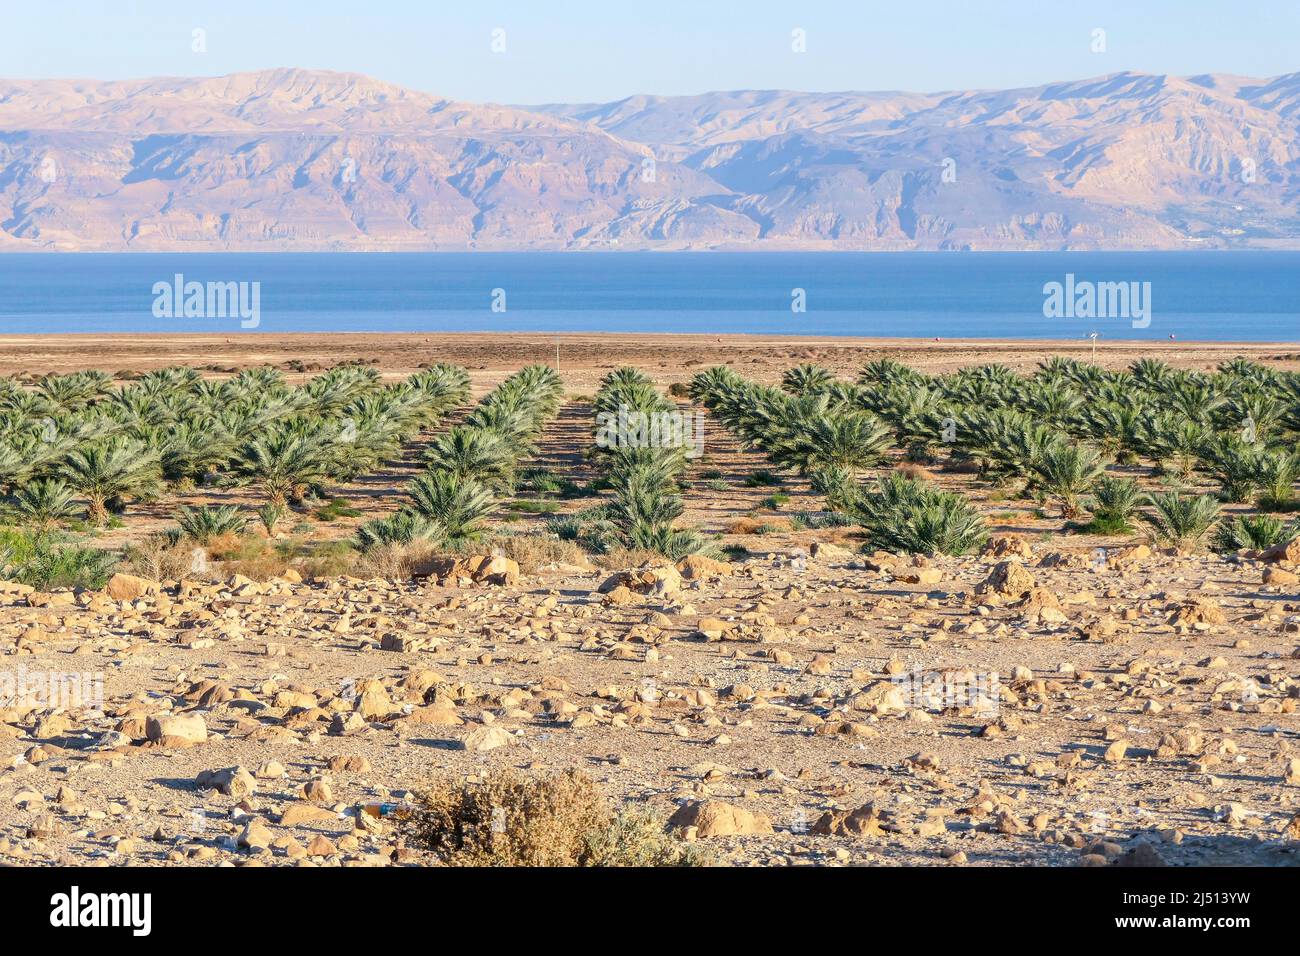 View of the mountains across the waters of the Dead Sea. Plantation of date palms. Israel Stock Photo